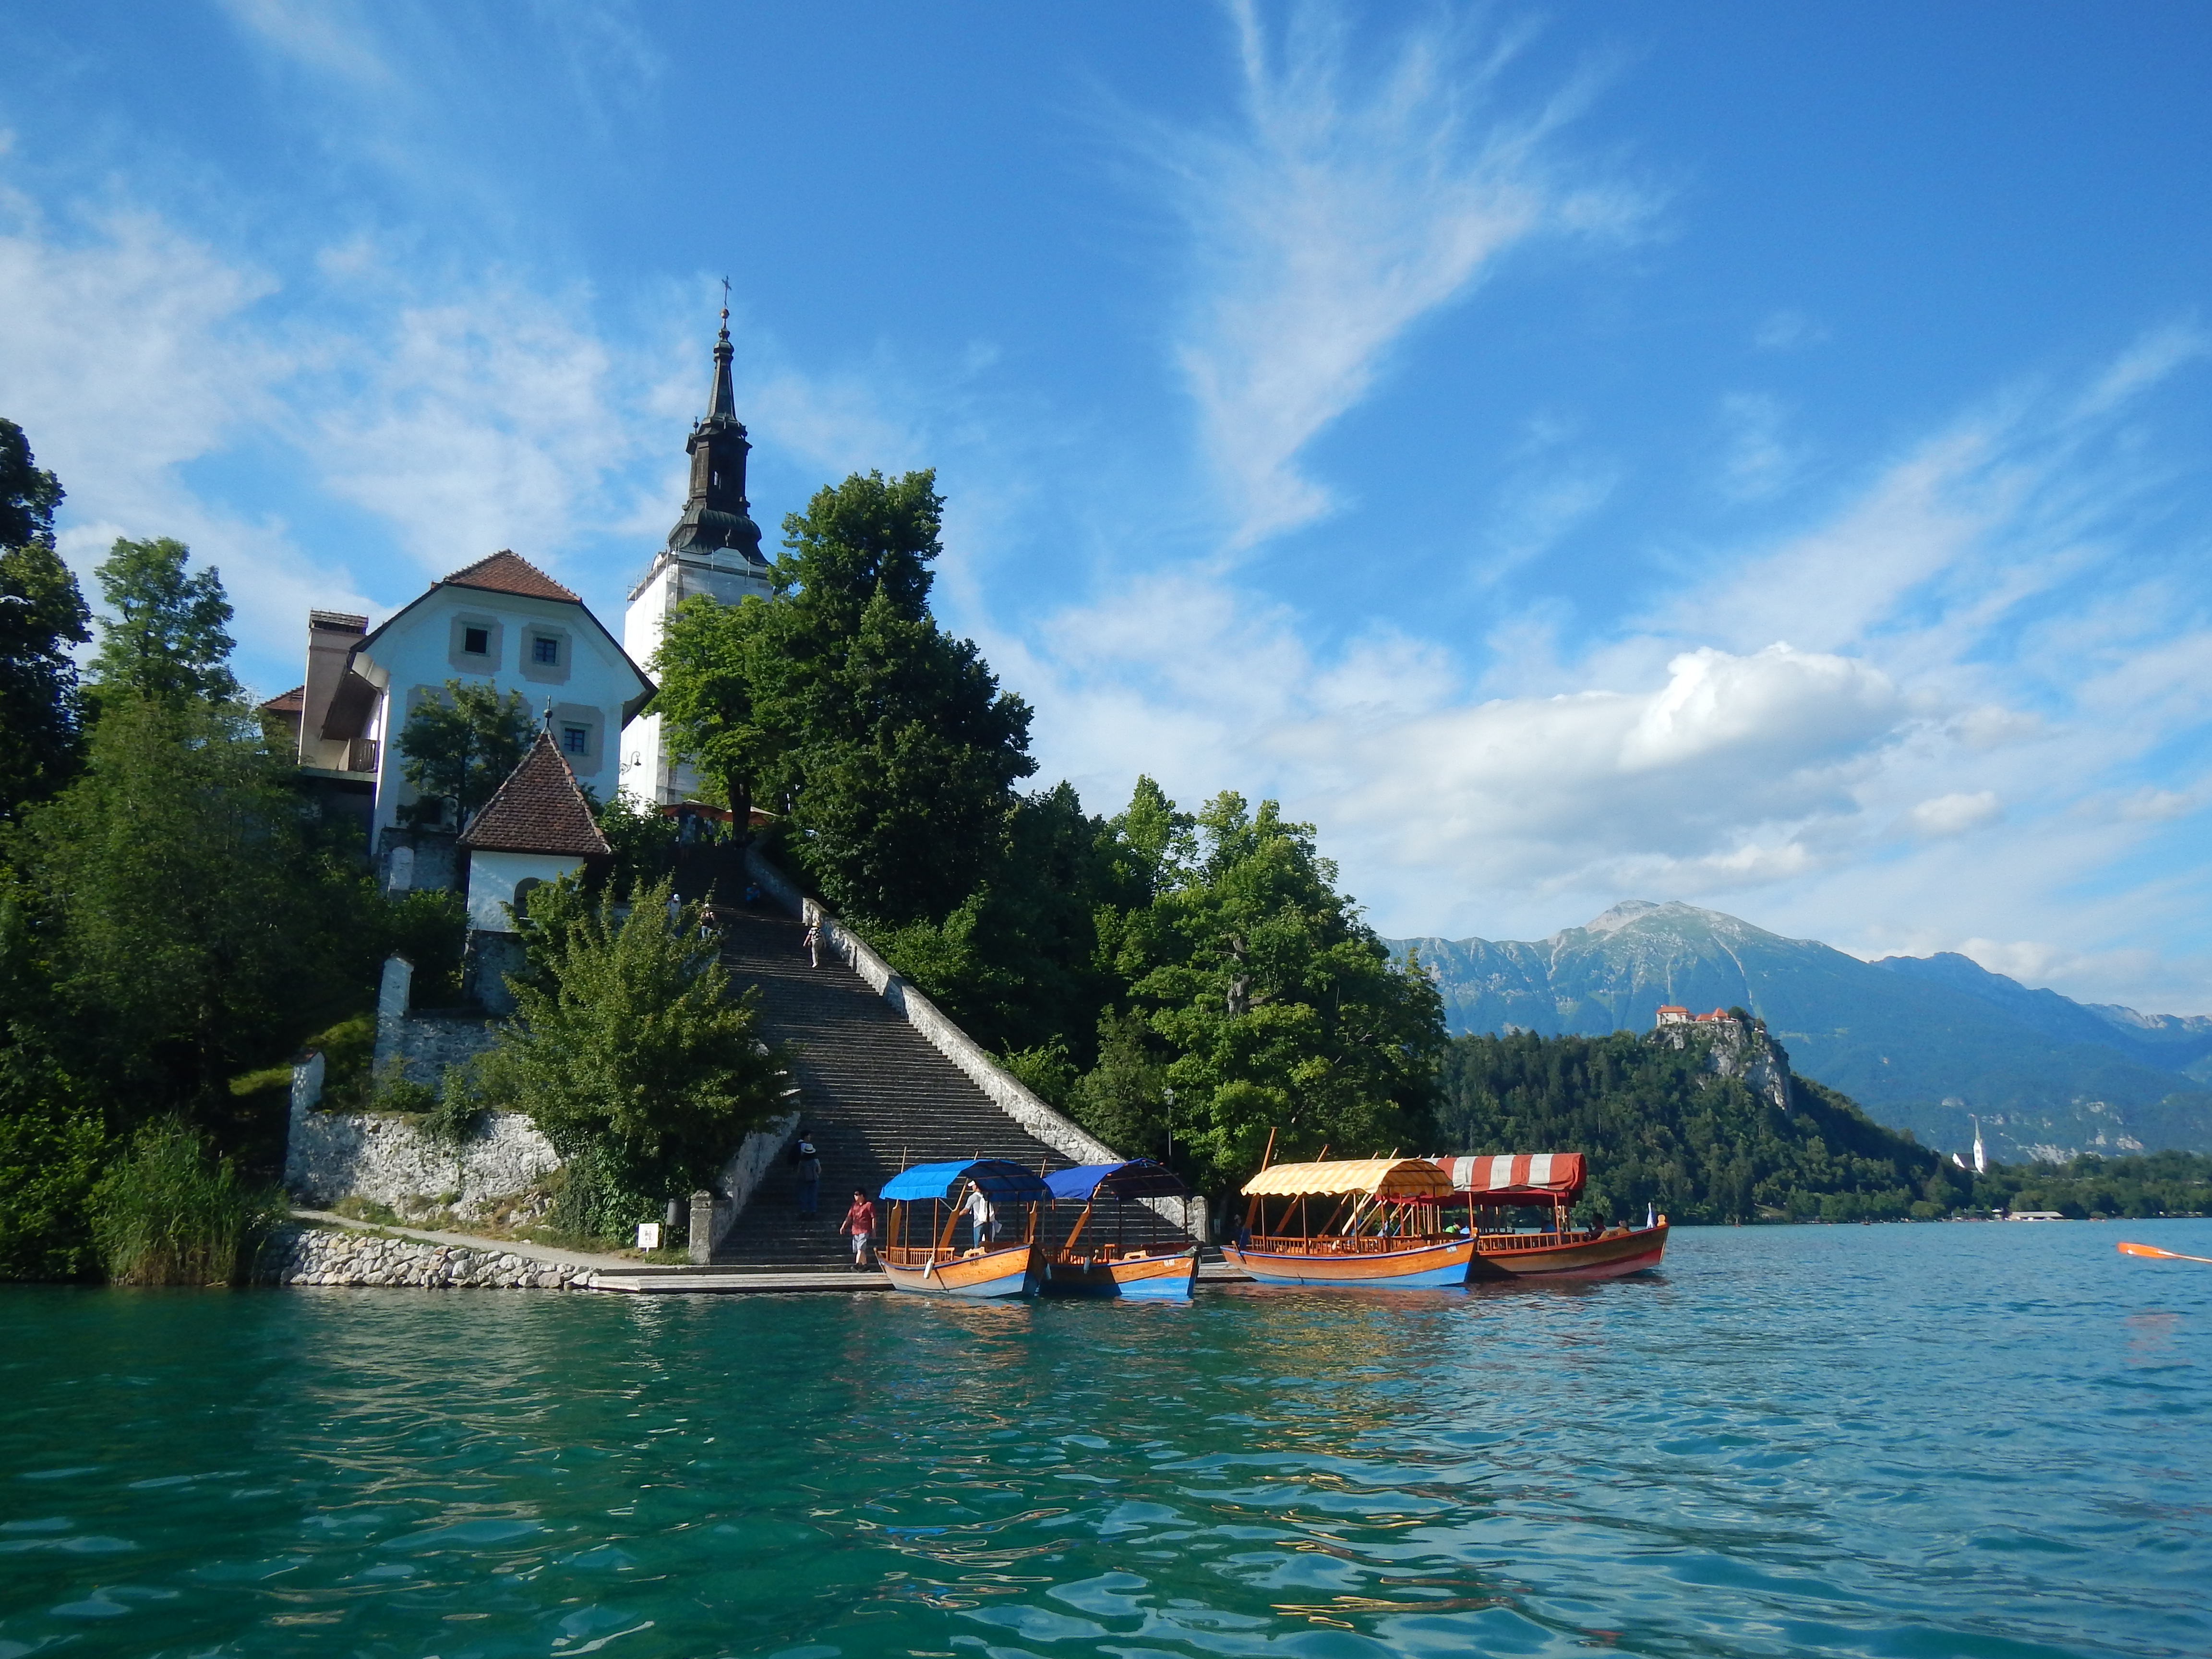 From Ljubljana: Trip to Lake Bled and Bled Castle